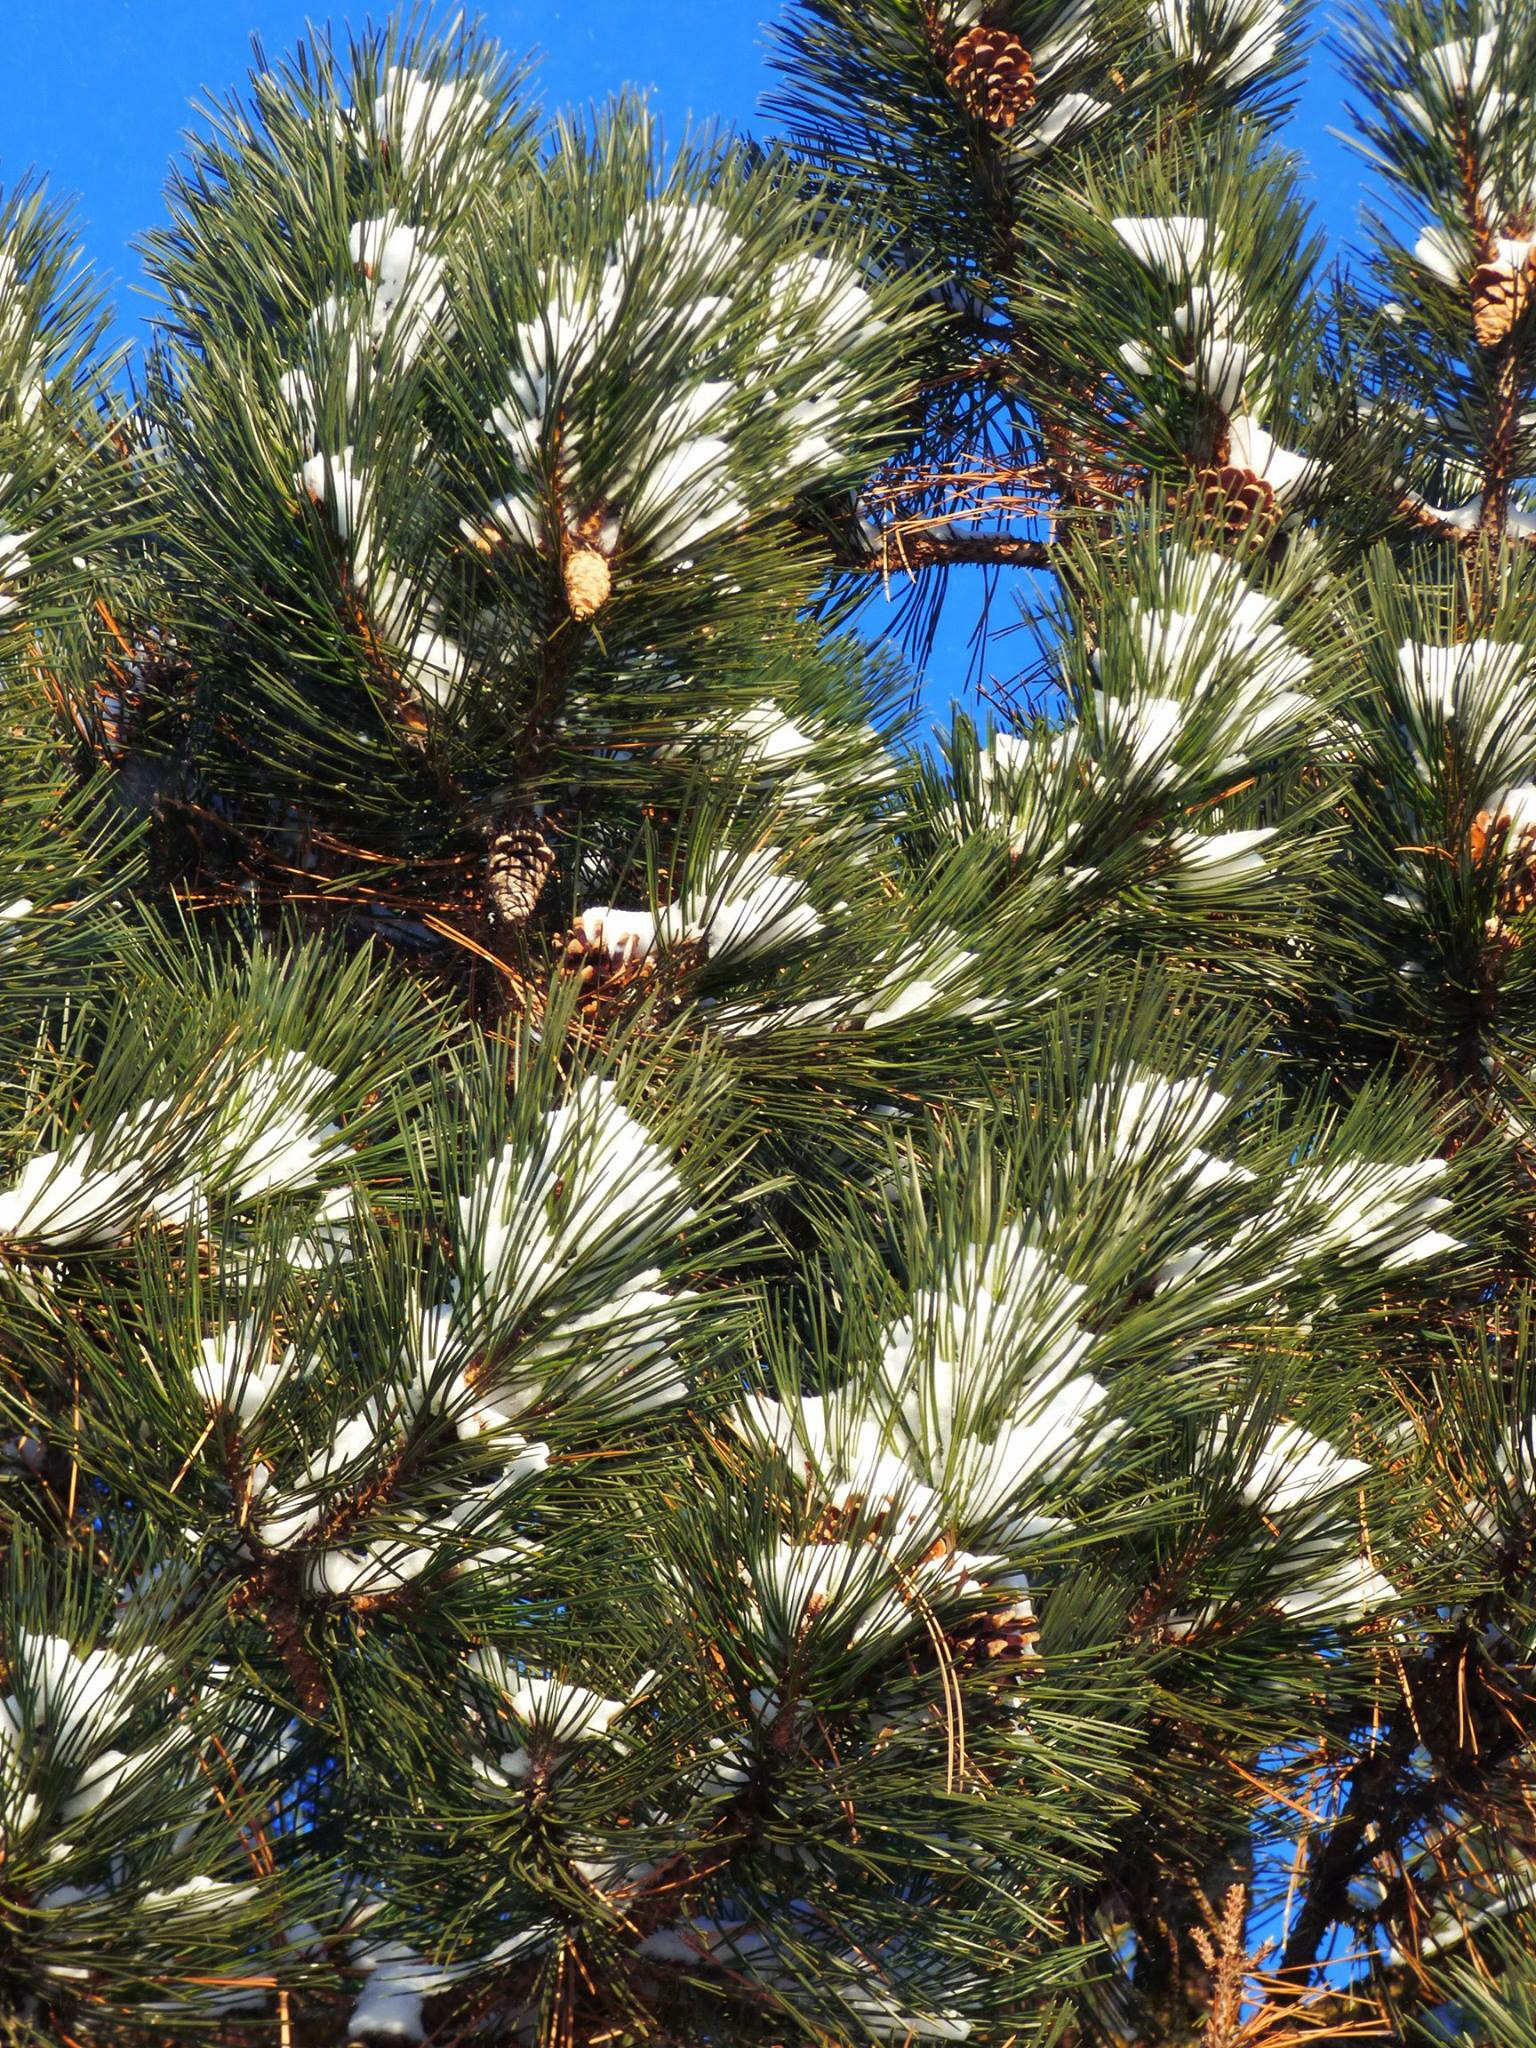 (1 of 2) Snow nestles itself in the needles of an evergreen. Photo: Amy Scroggins, nature, tree, winter, snow, plant